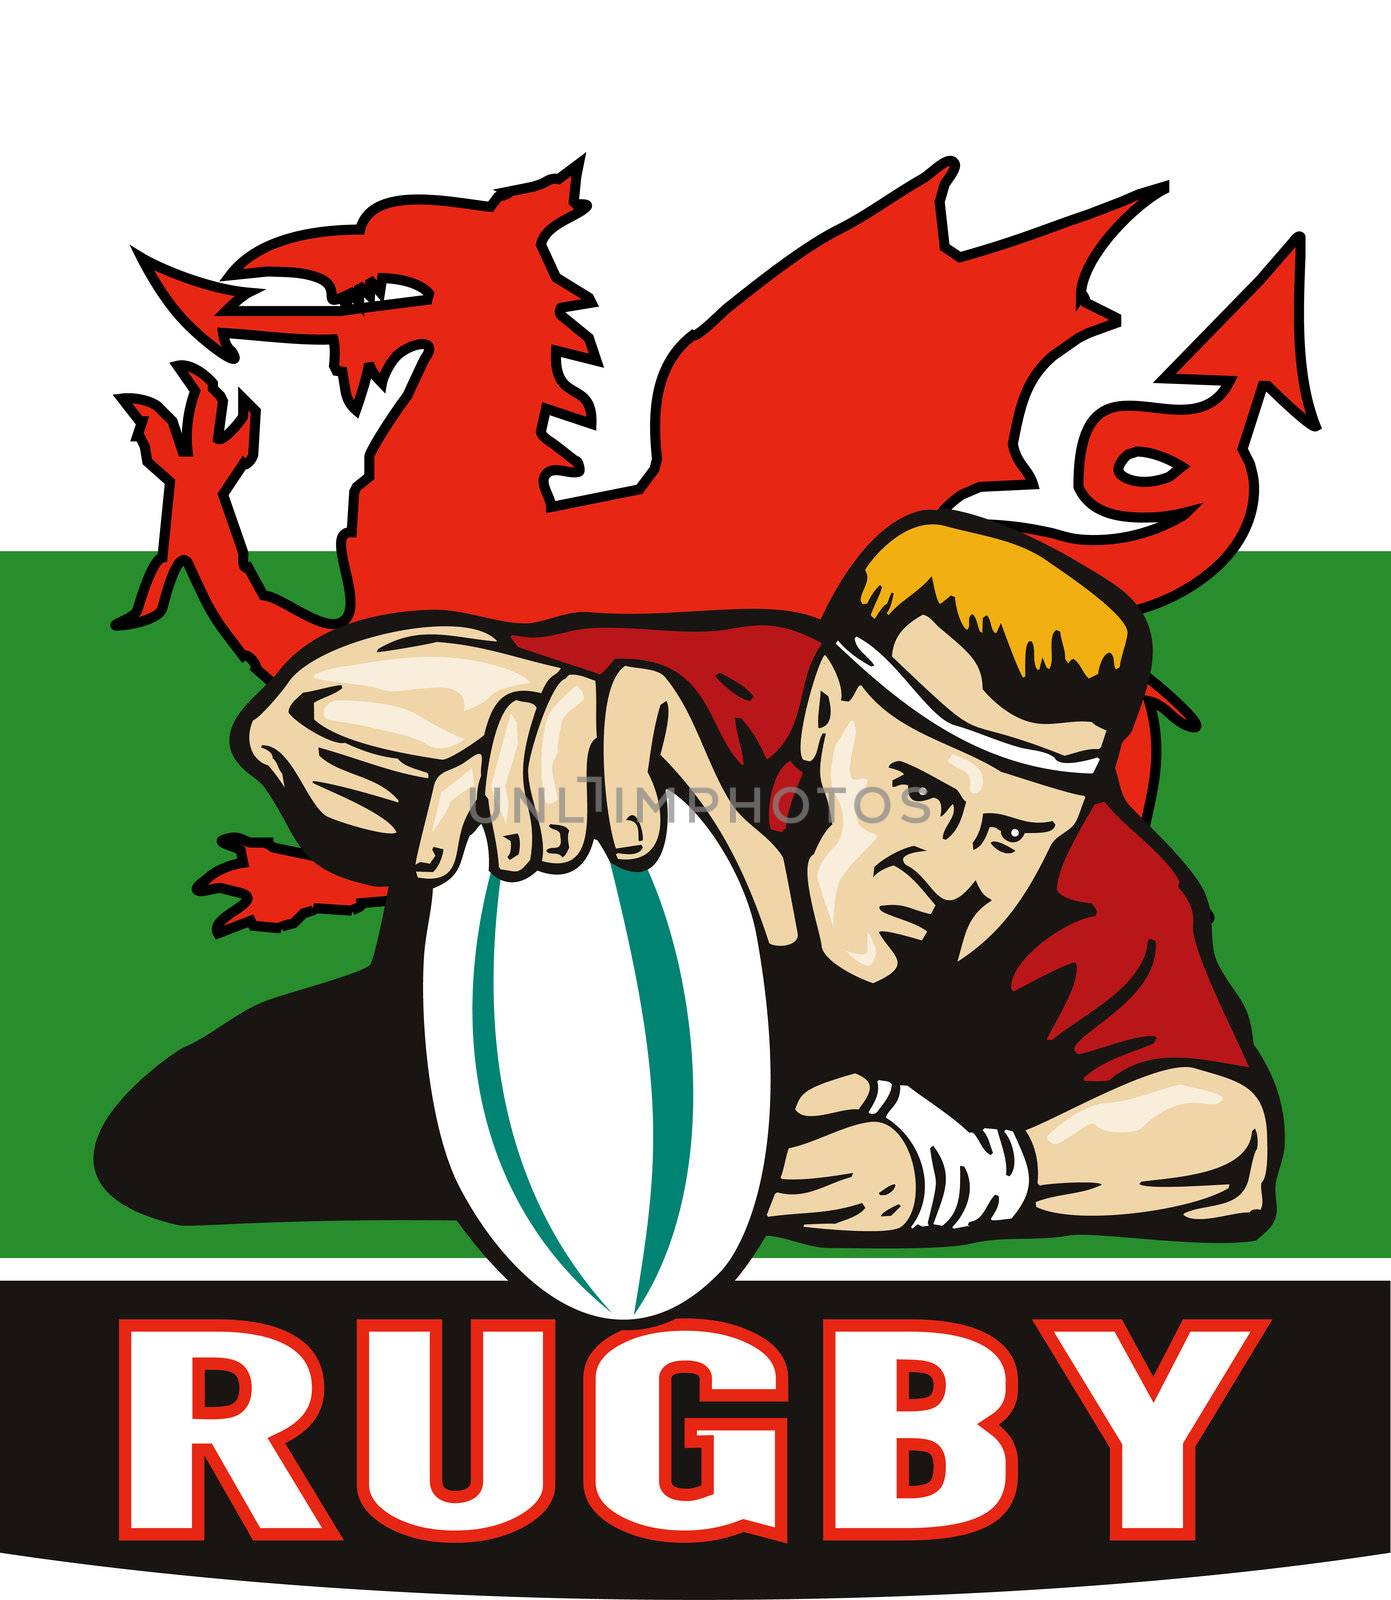 illustration of a Rugby player scoring try viewed from front with wales or welsh  flag in background and words "rugby"